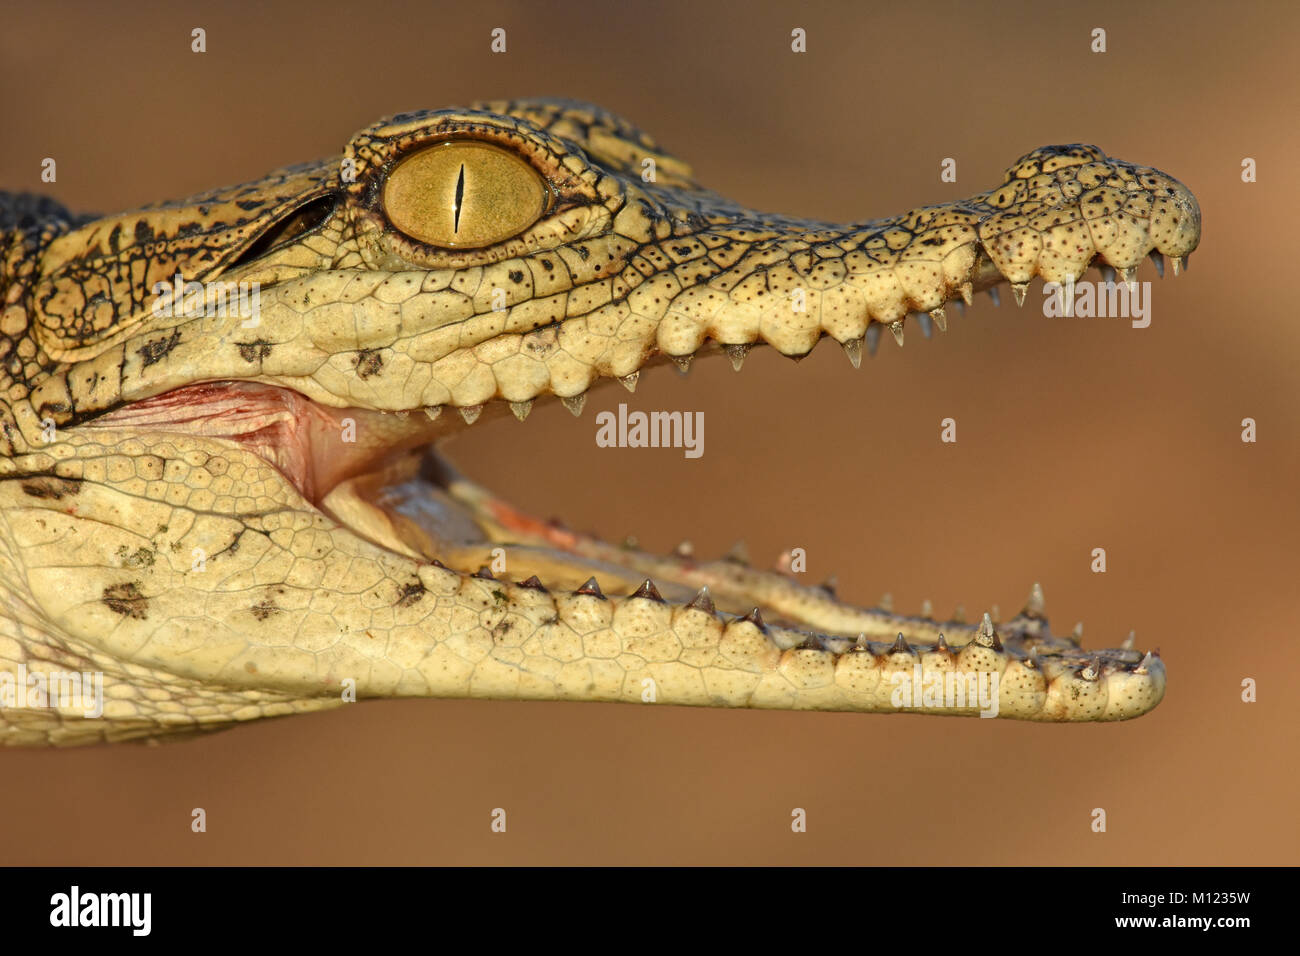 Young Nile crocodile open its mouth Stock Photo